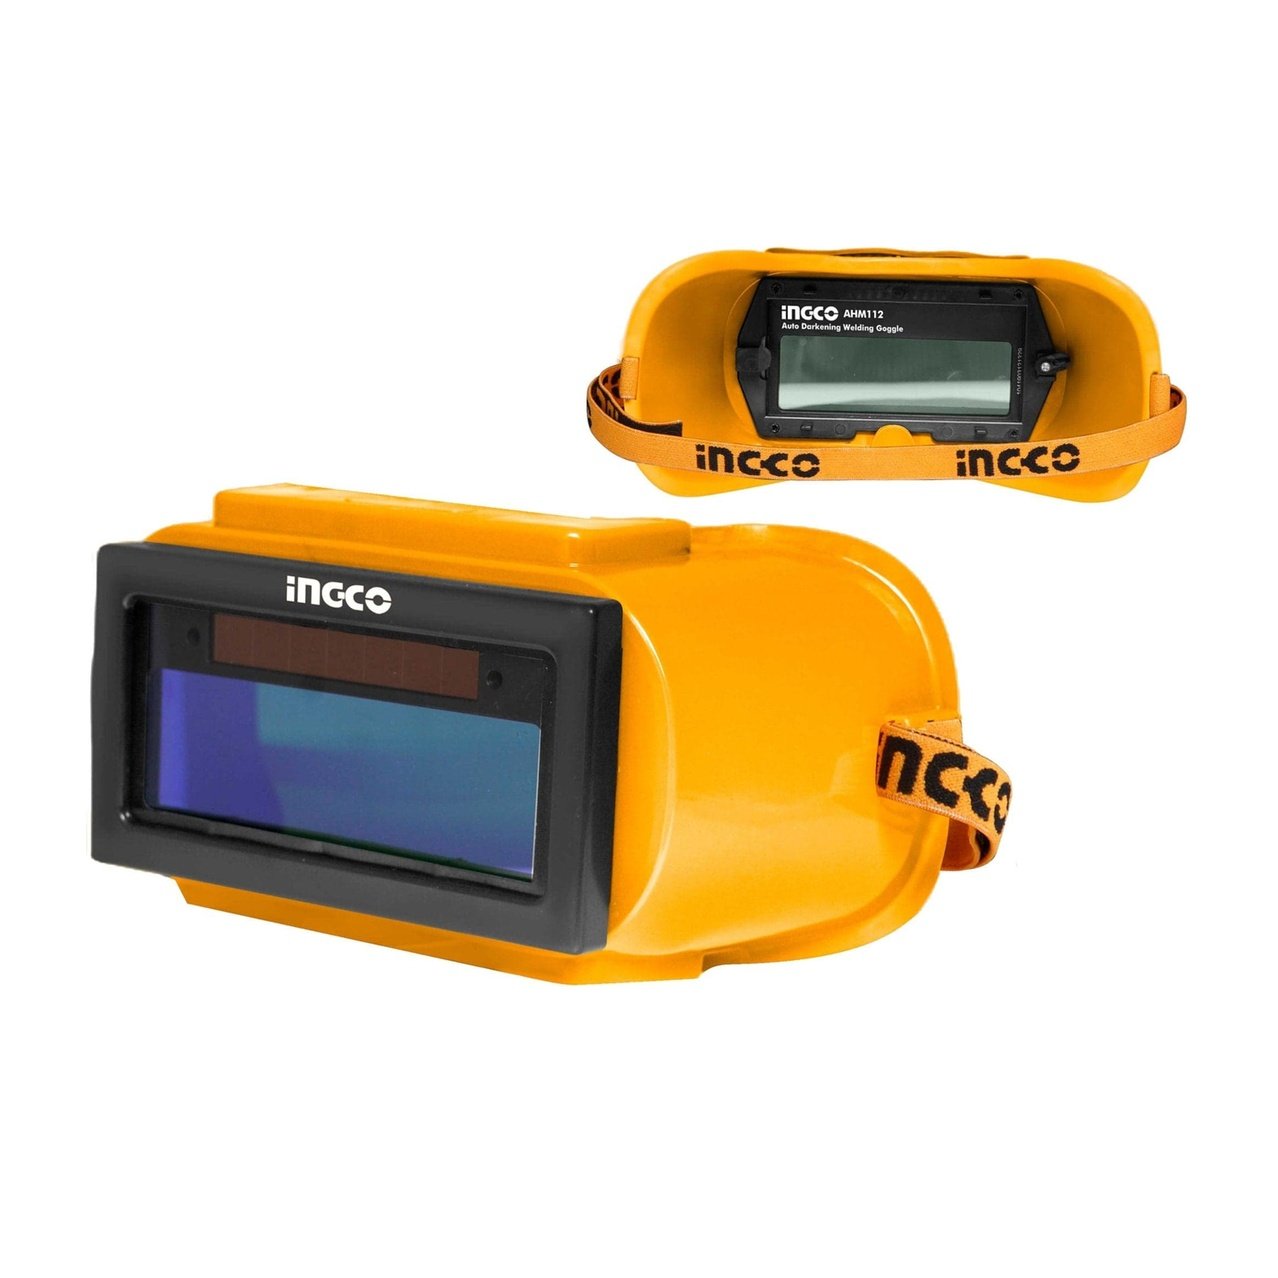 Ingco Auto Darkening Welding Goggles - AHM112 | Supply Master | Accra, Ghana Eye Protection & Safety Glasses Buy Tools hardware Building materials